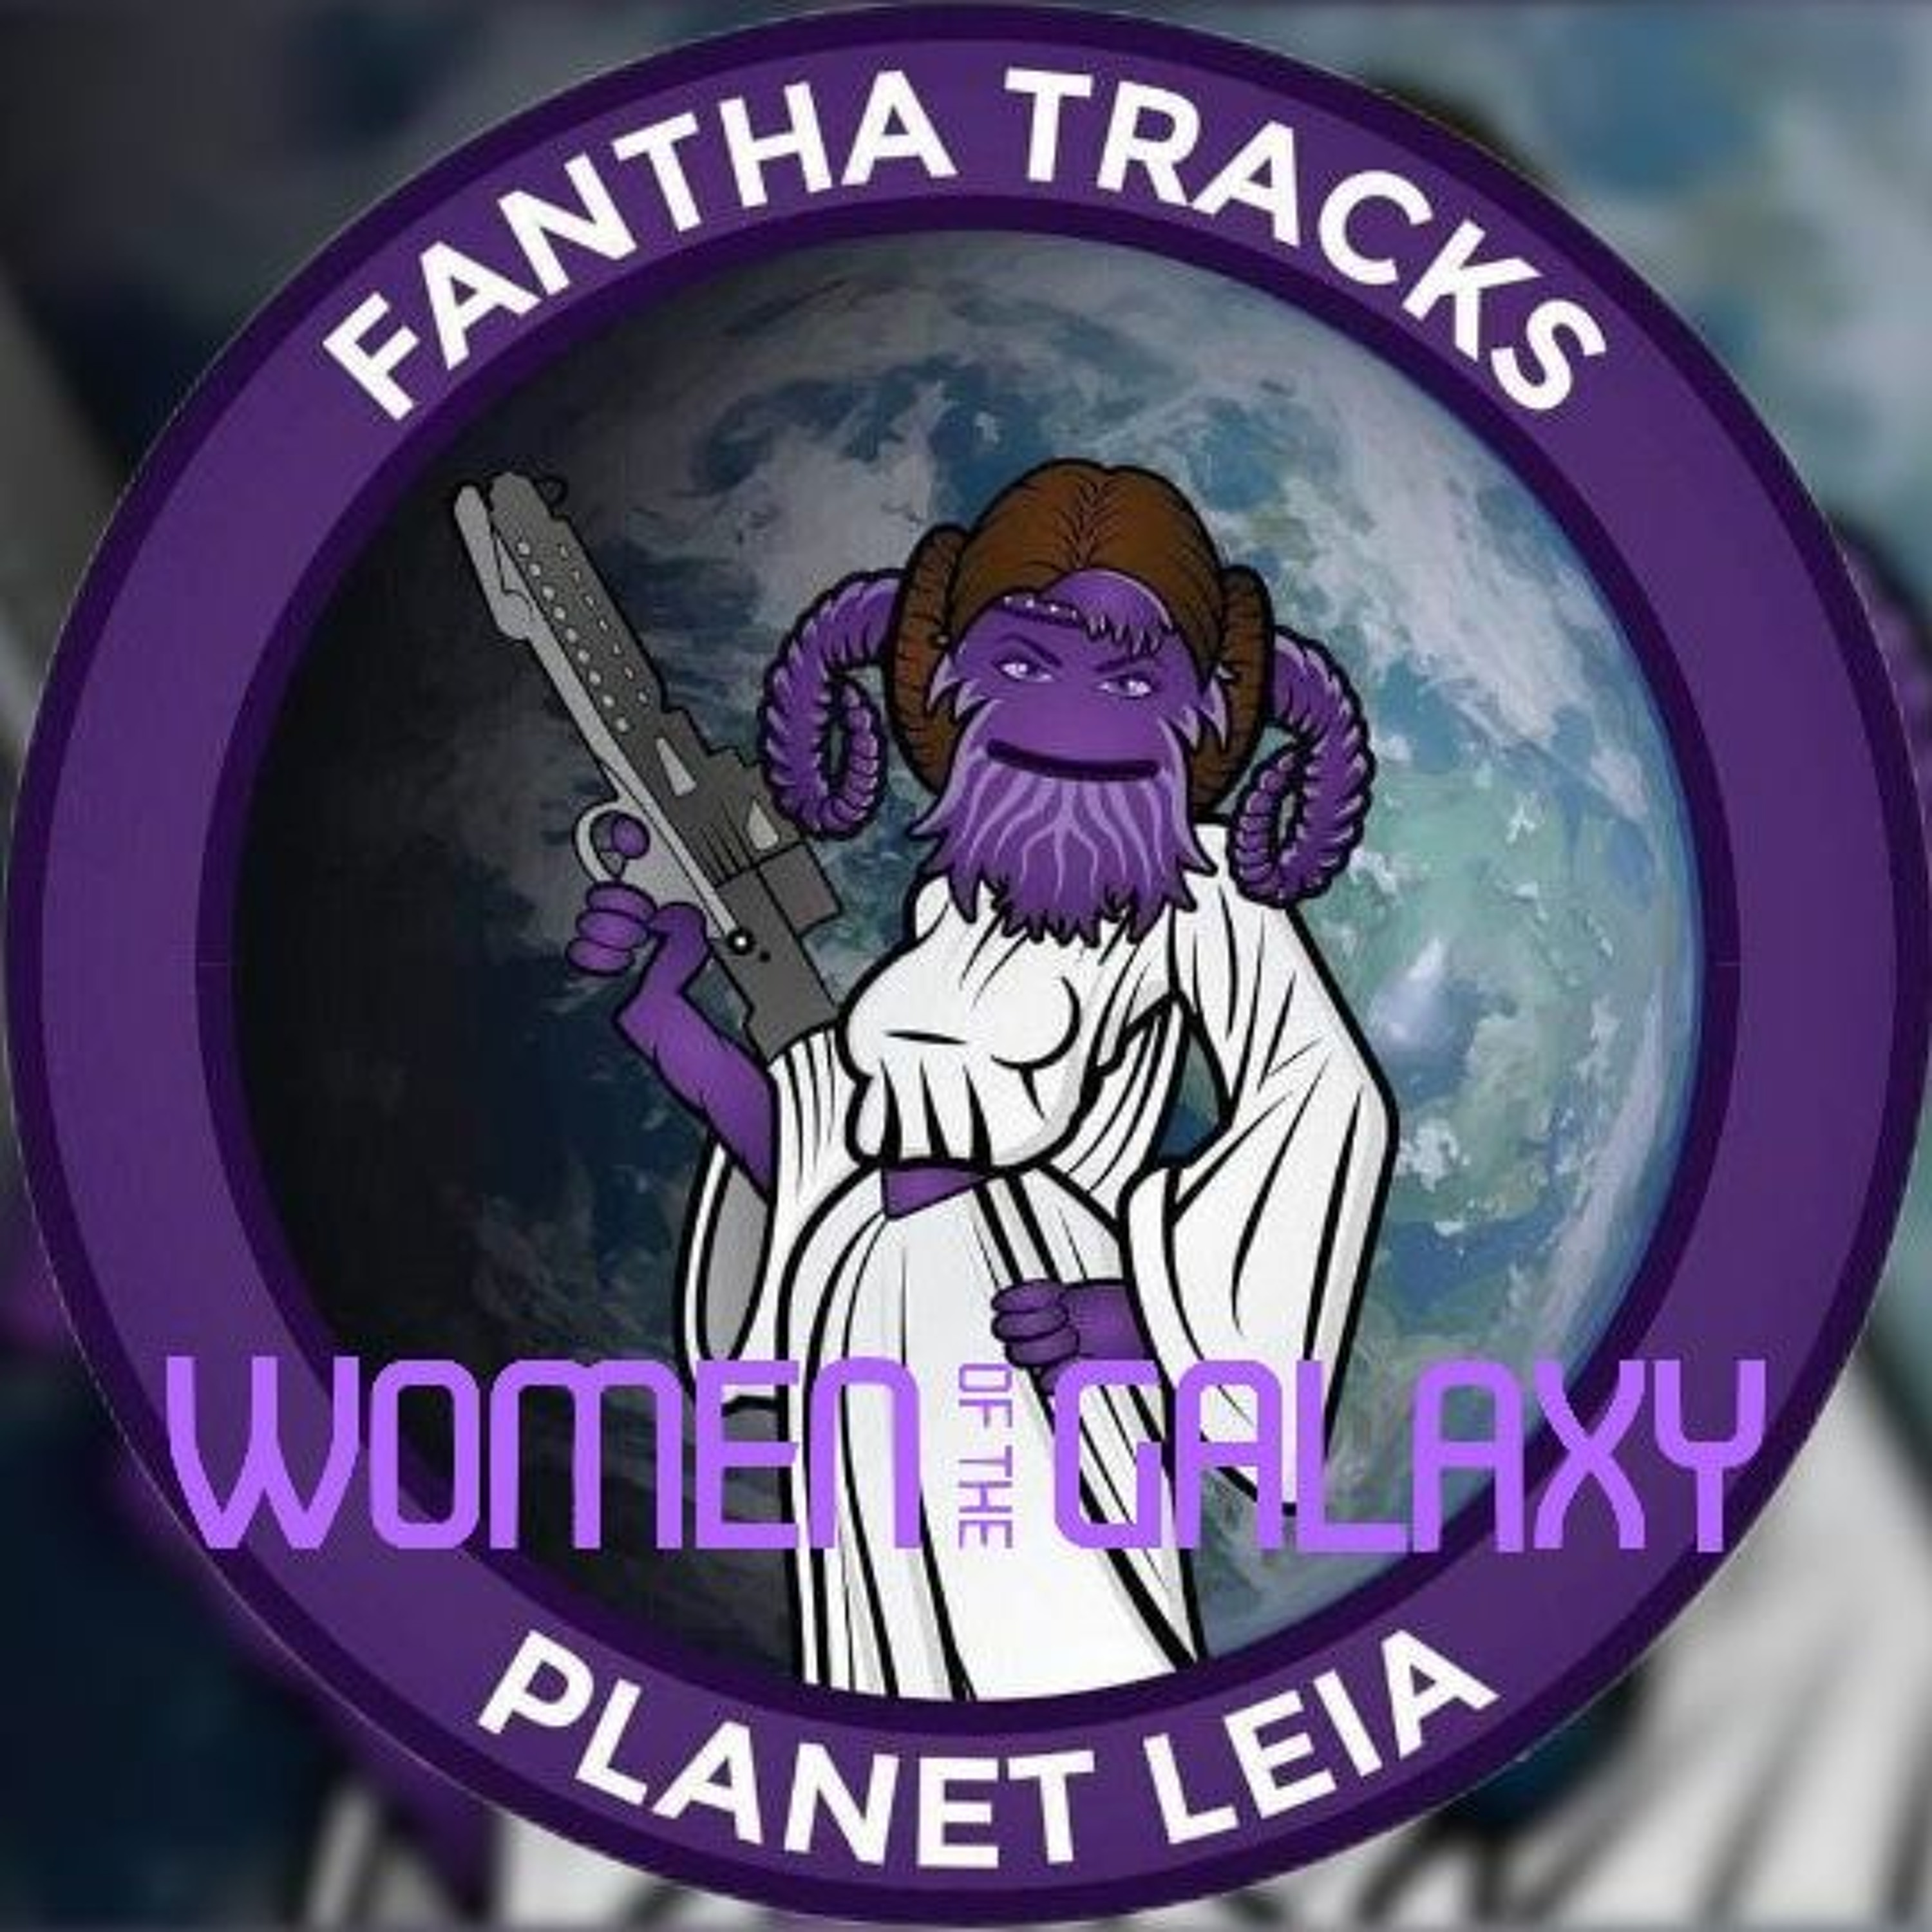 Planet Leia Episode 18: Somebody has to save our skins